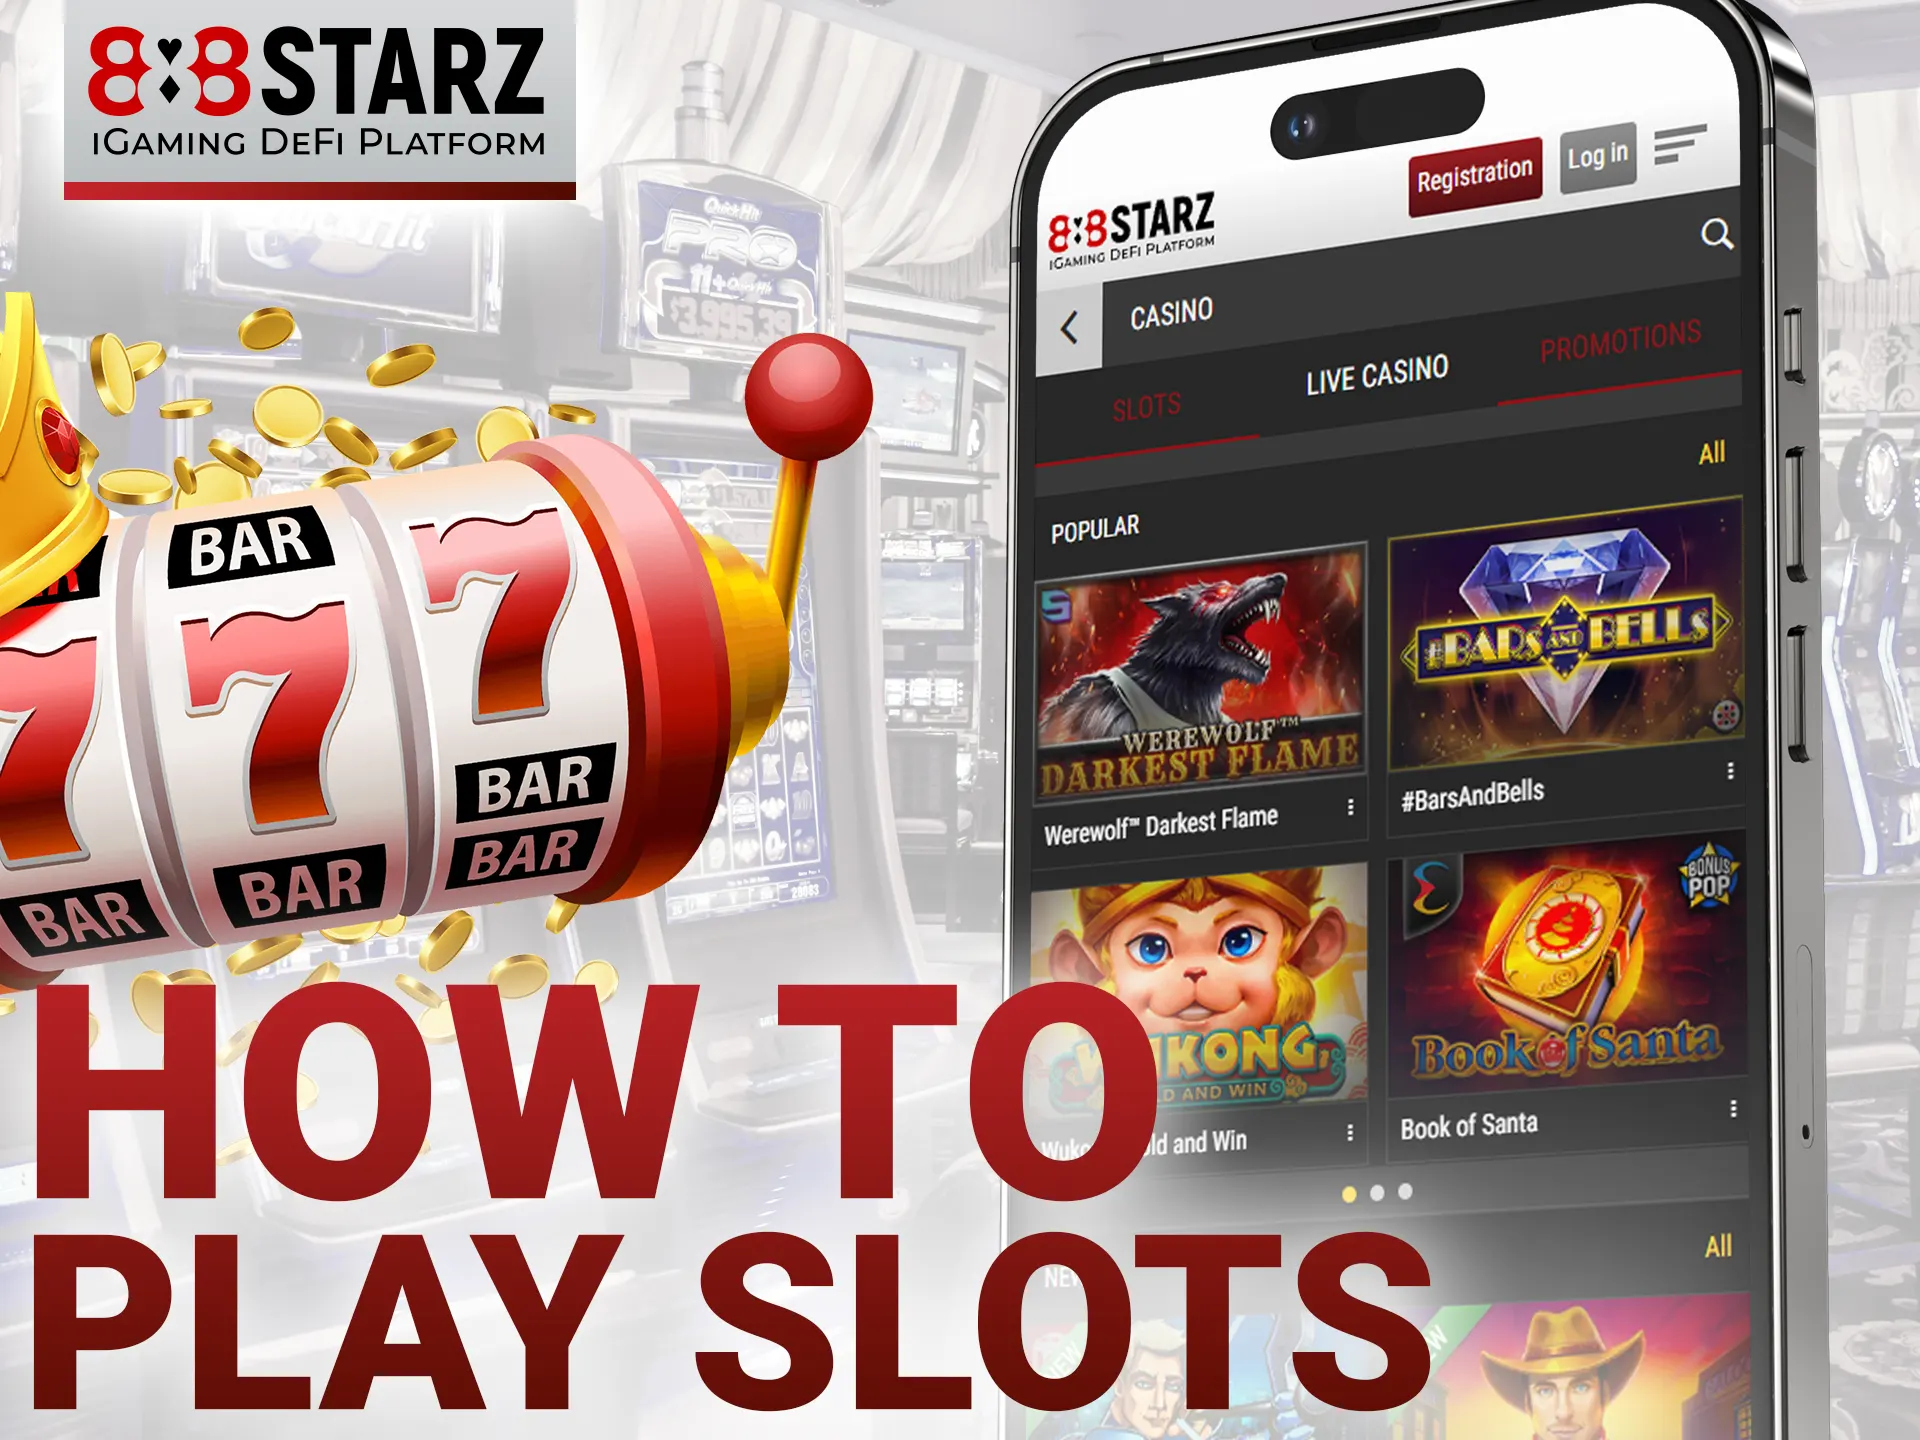 Find out how to play the slots at 888Starz.